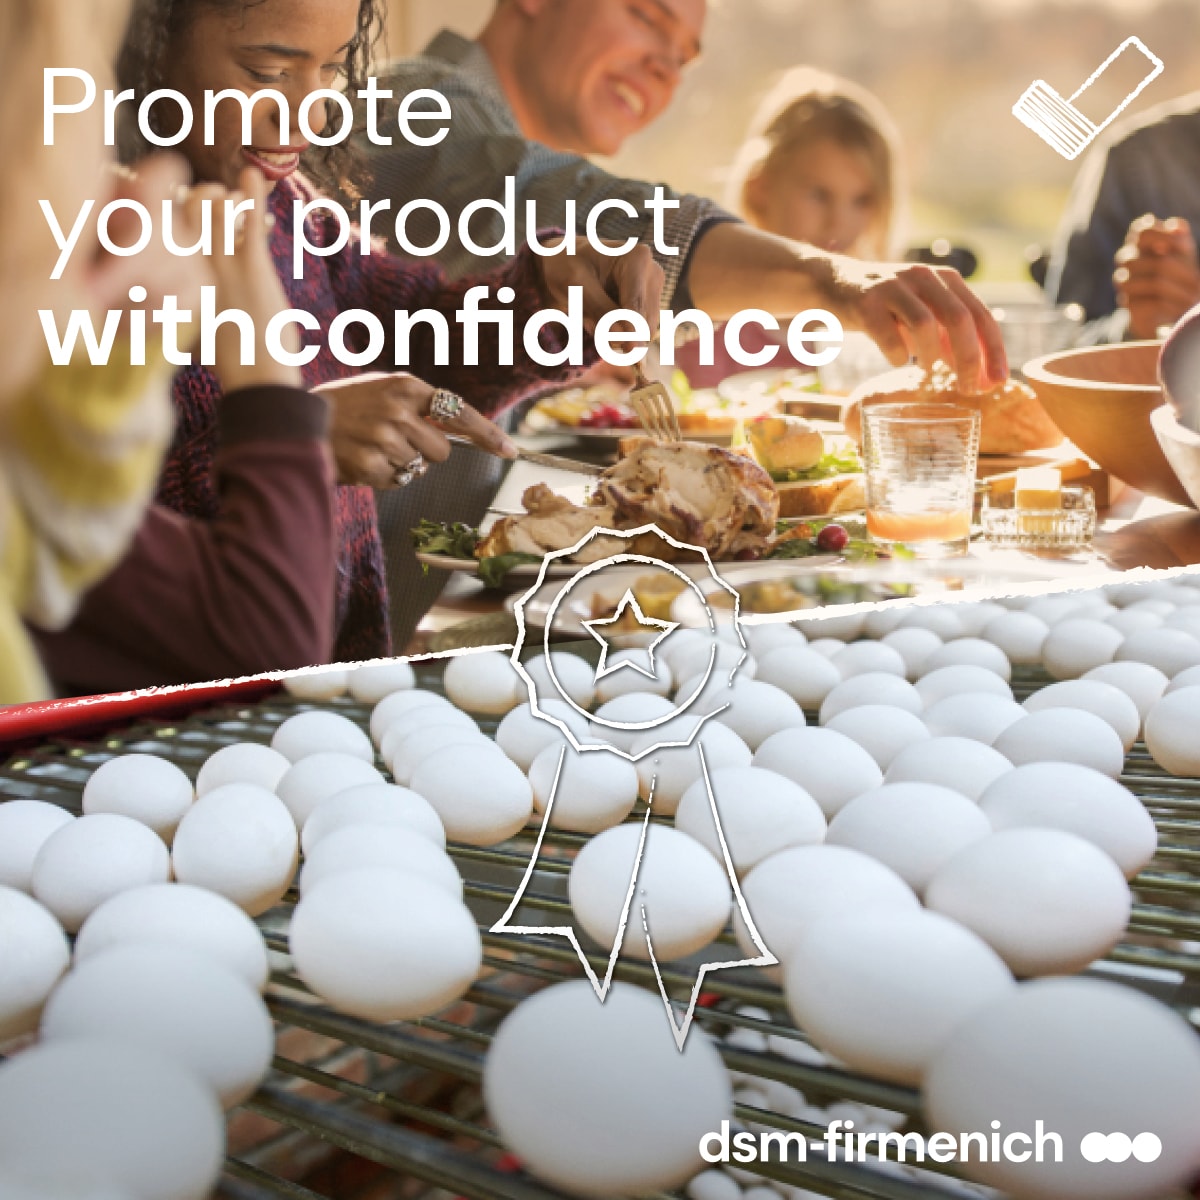 Promote your flock with confidence